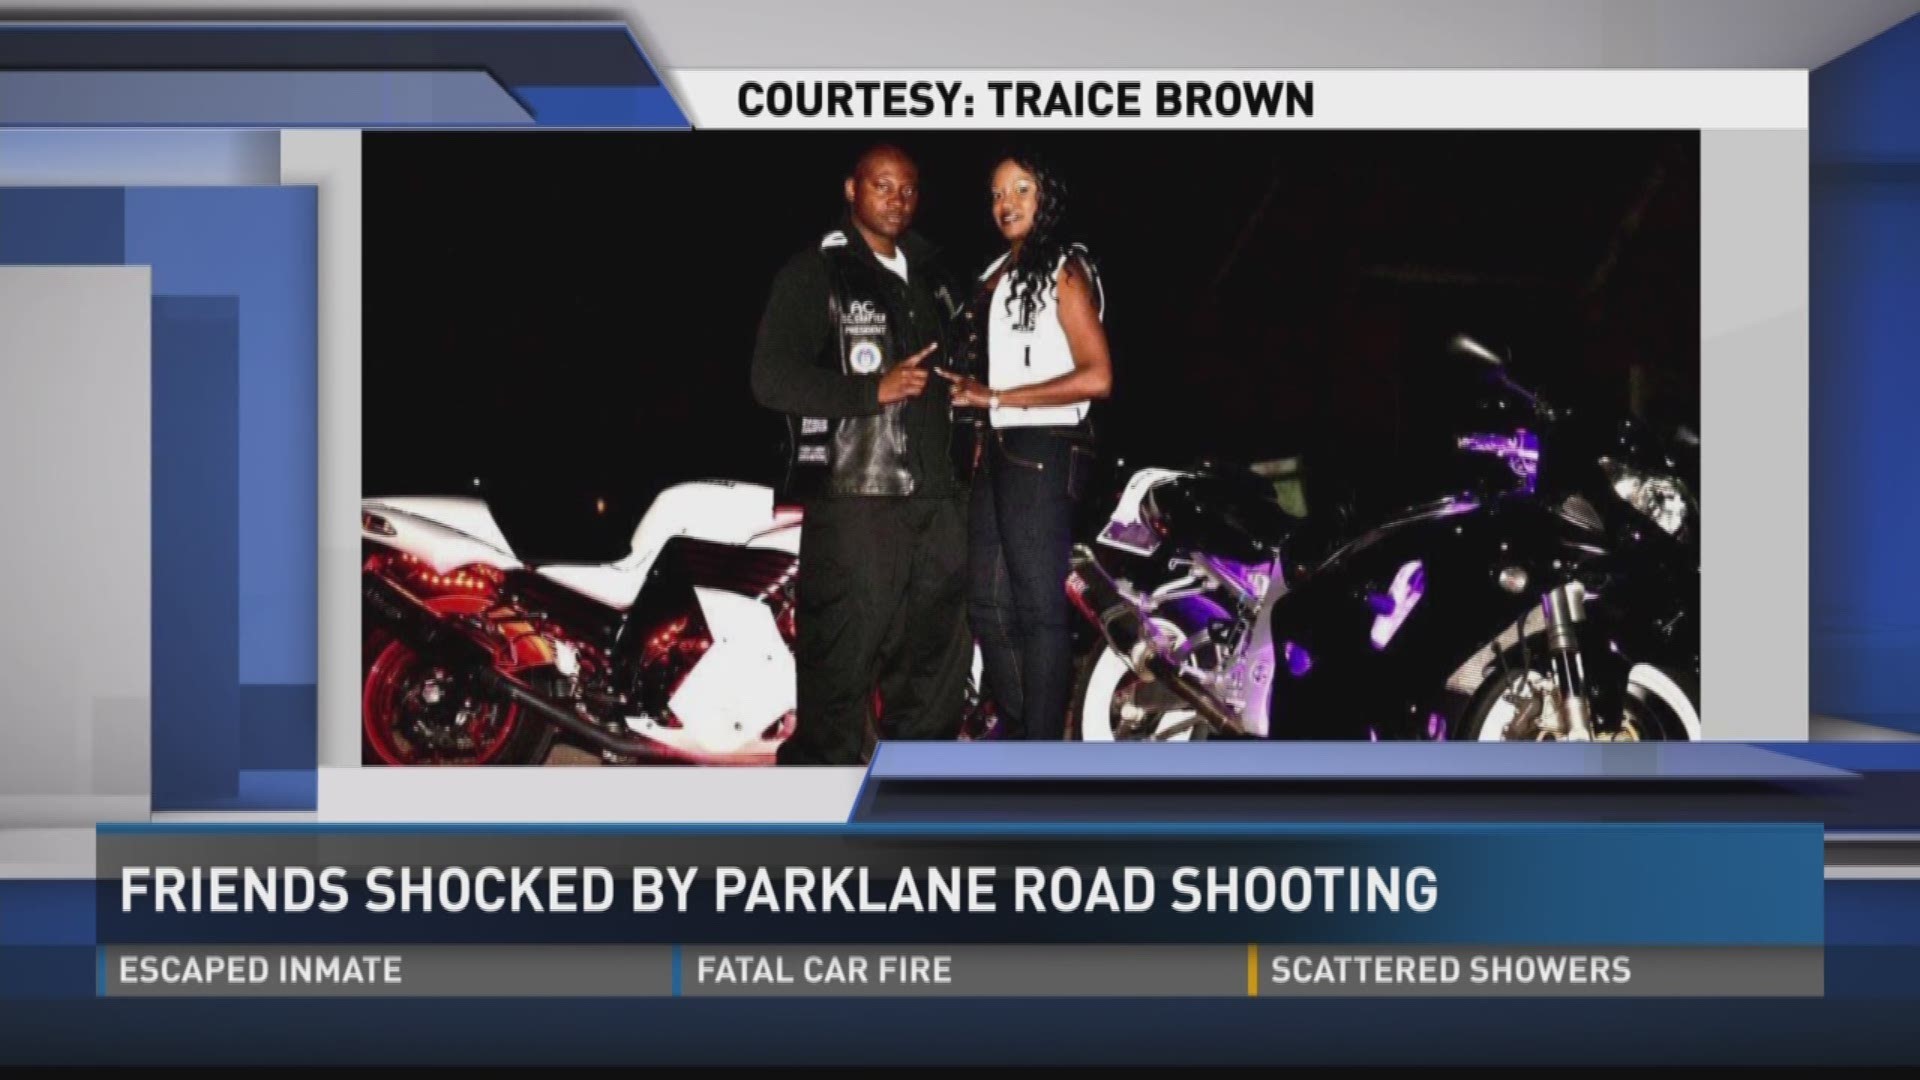 Names of the shooting victims on Parklane road they are identified as Aaron and Sydni Collins, husband and wife